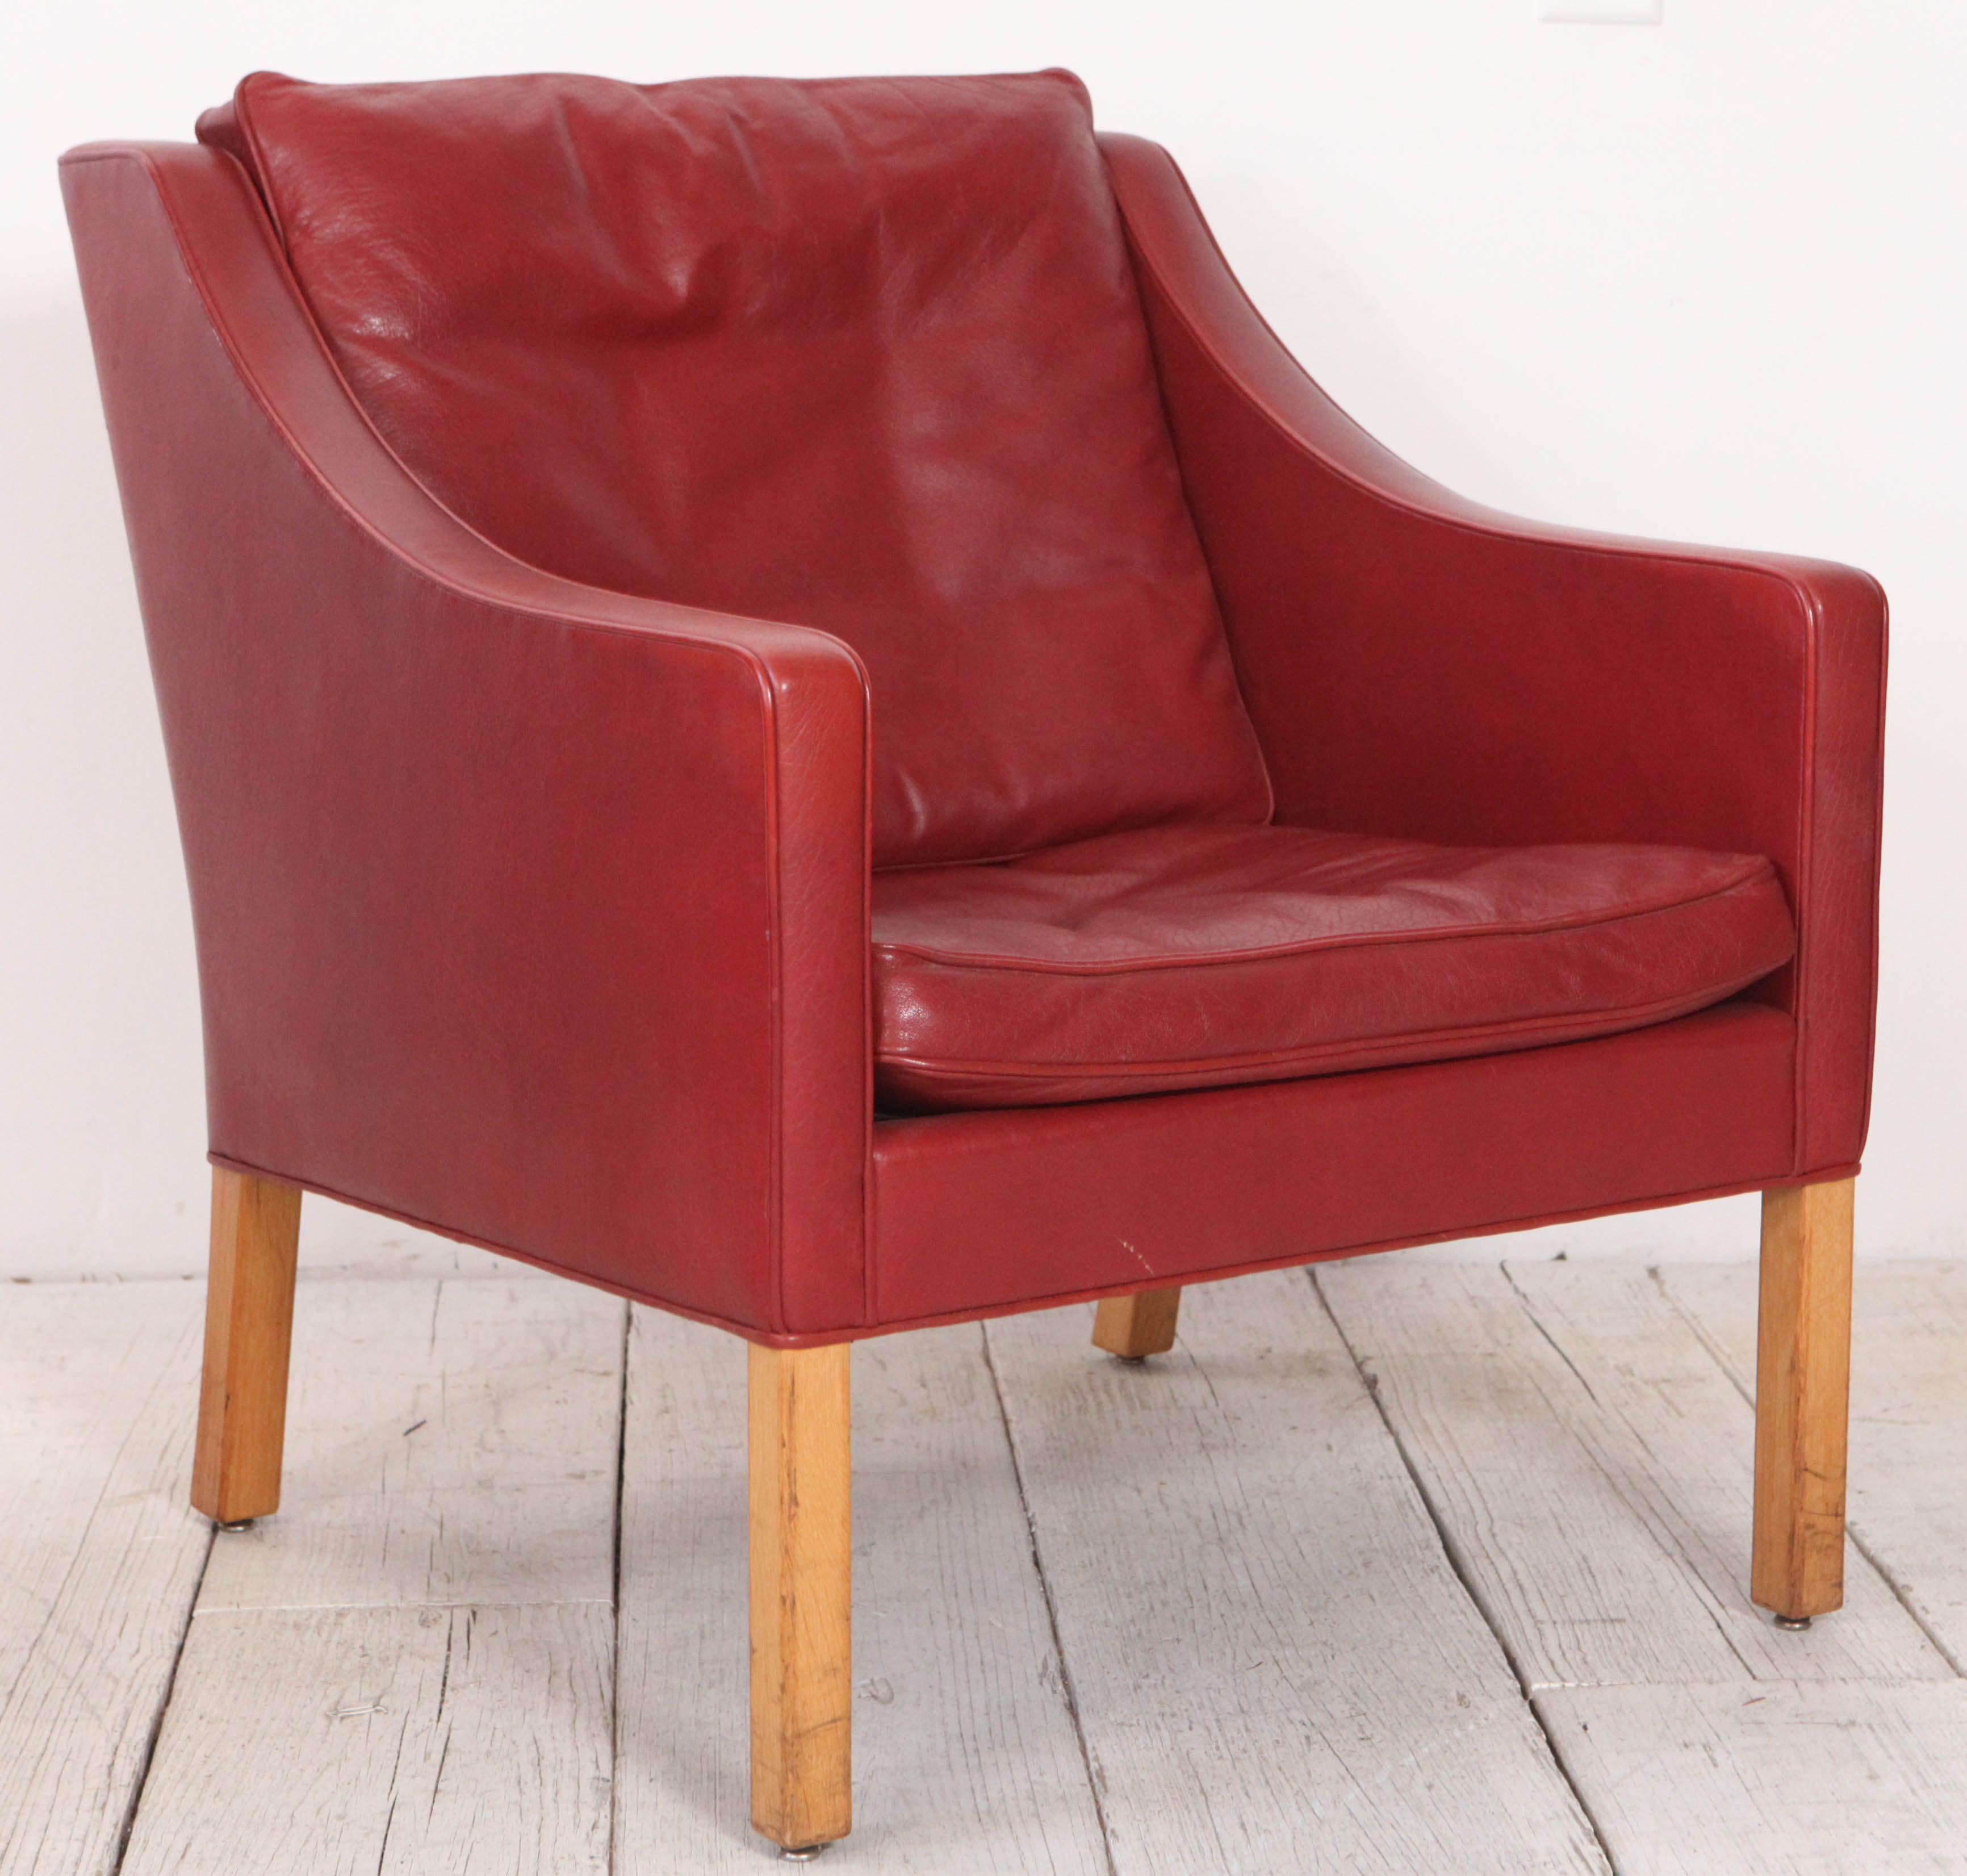 Pair of Red Leather Børge Mogensen Chairs for Fredericia Furniture